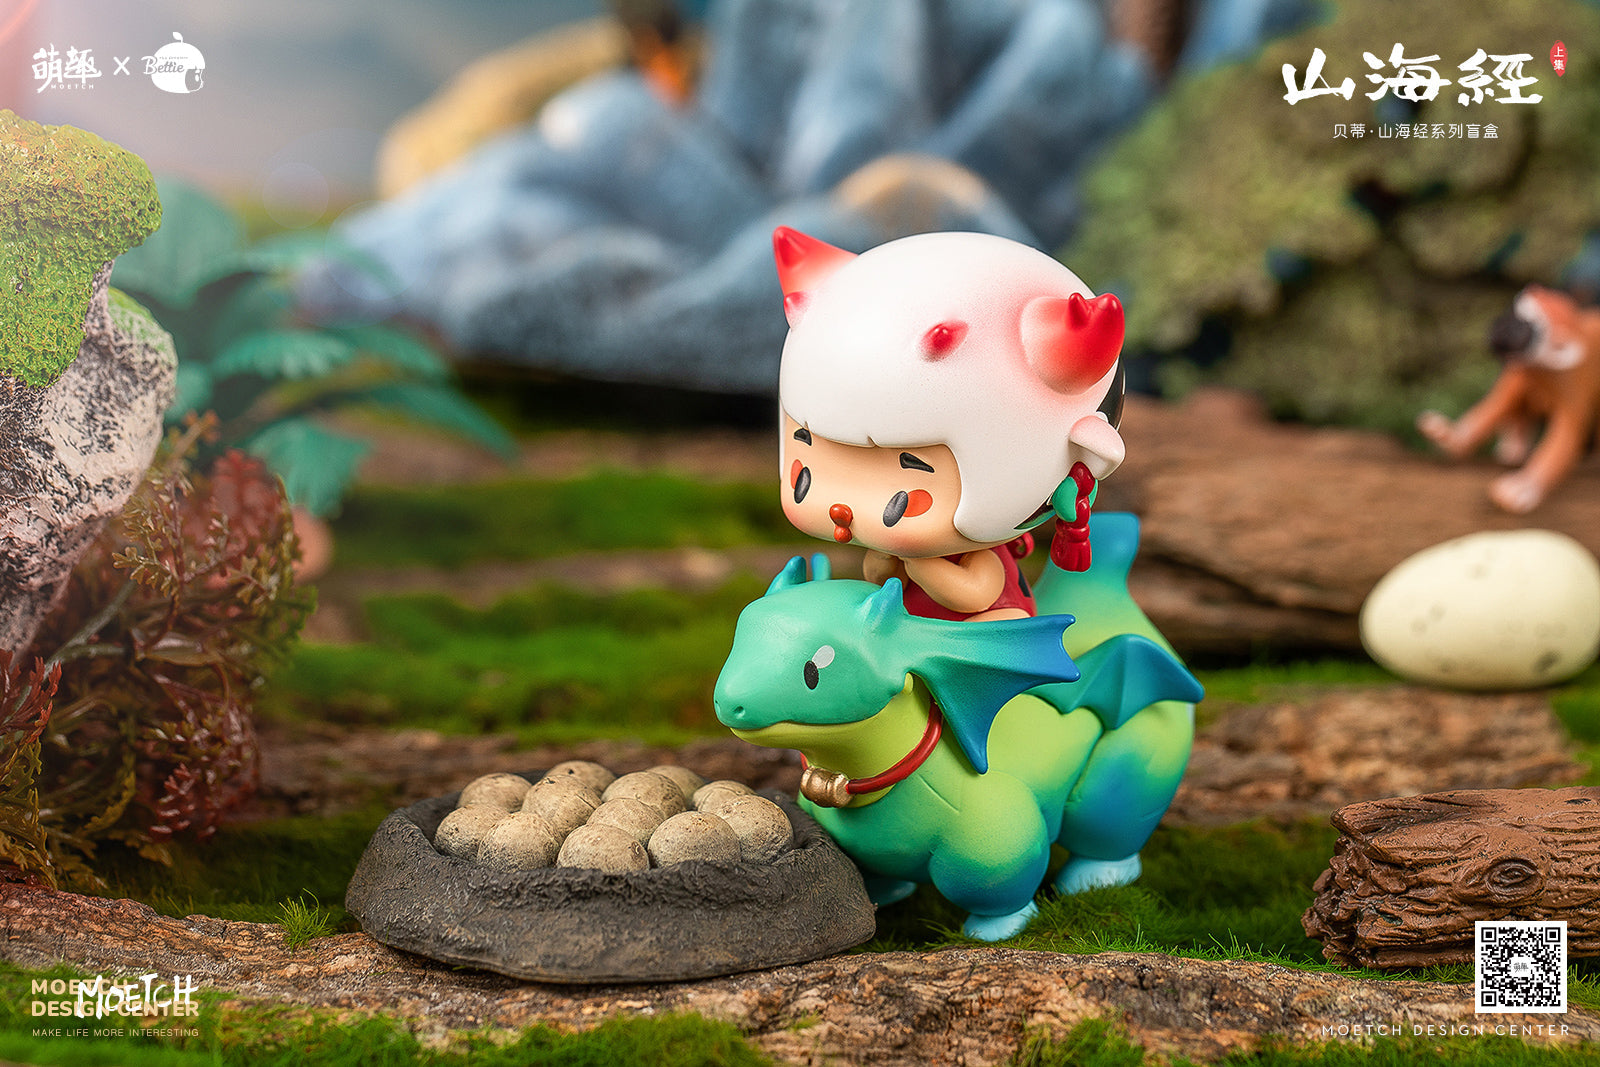 Bettie The Classic of Mountain and Sea Blind Box Series by Yindao Murong x Moetch Toys